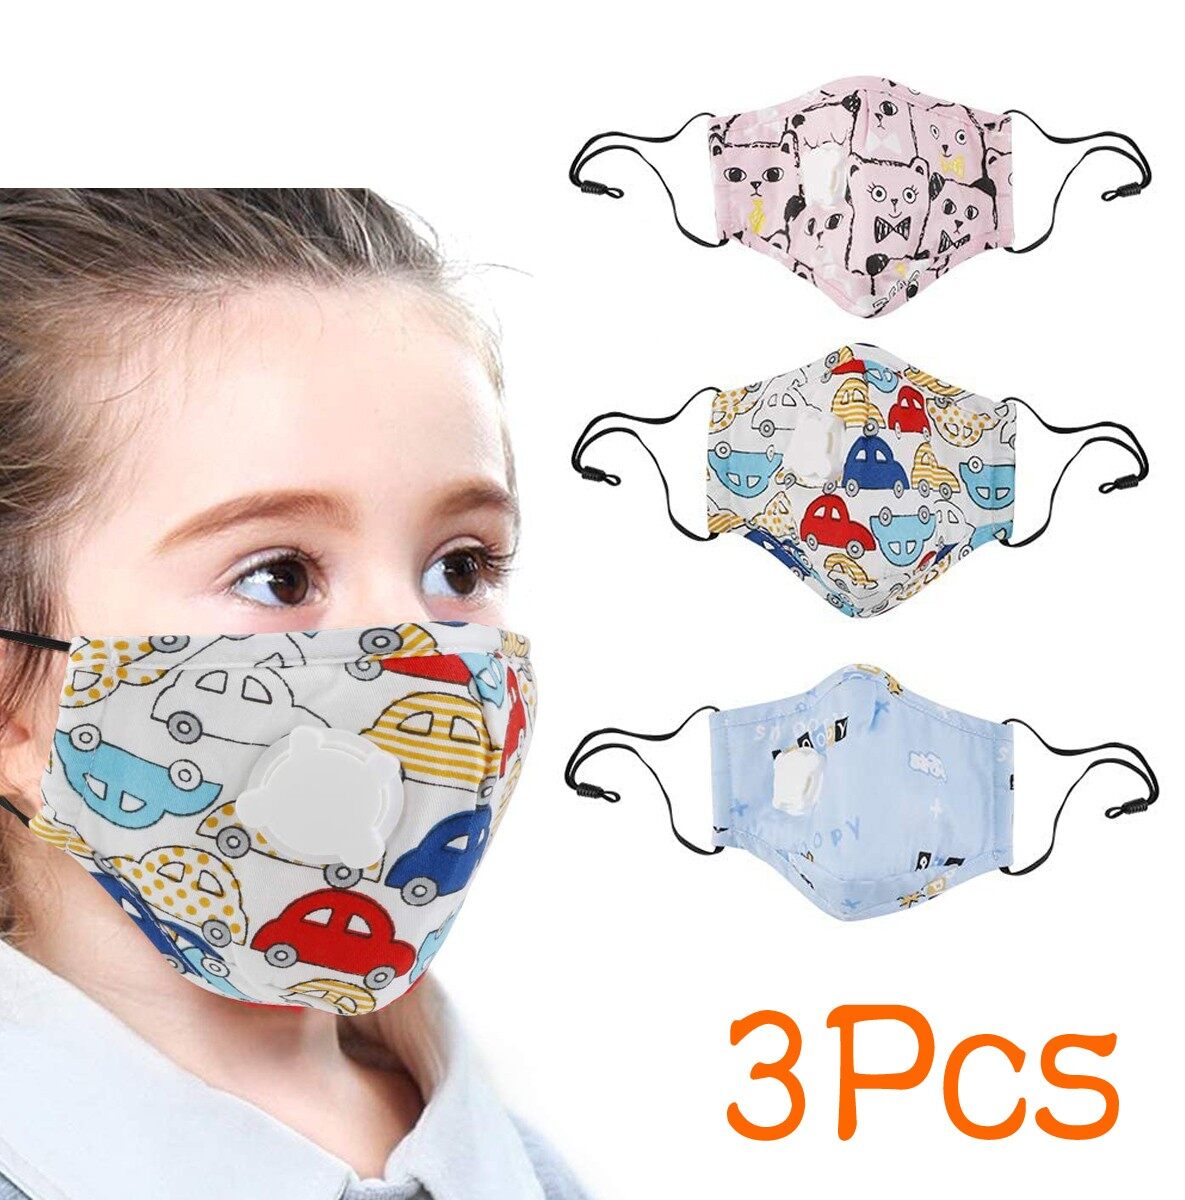 Face Covers for Child Mouth Covers Boys and Girls 3Pcs 5Pcs Kids Cartoon Adult Reusable Face Covers Washable Facial Mouth Nose Shield Breathable for Bike Motorcycle Sport 